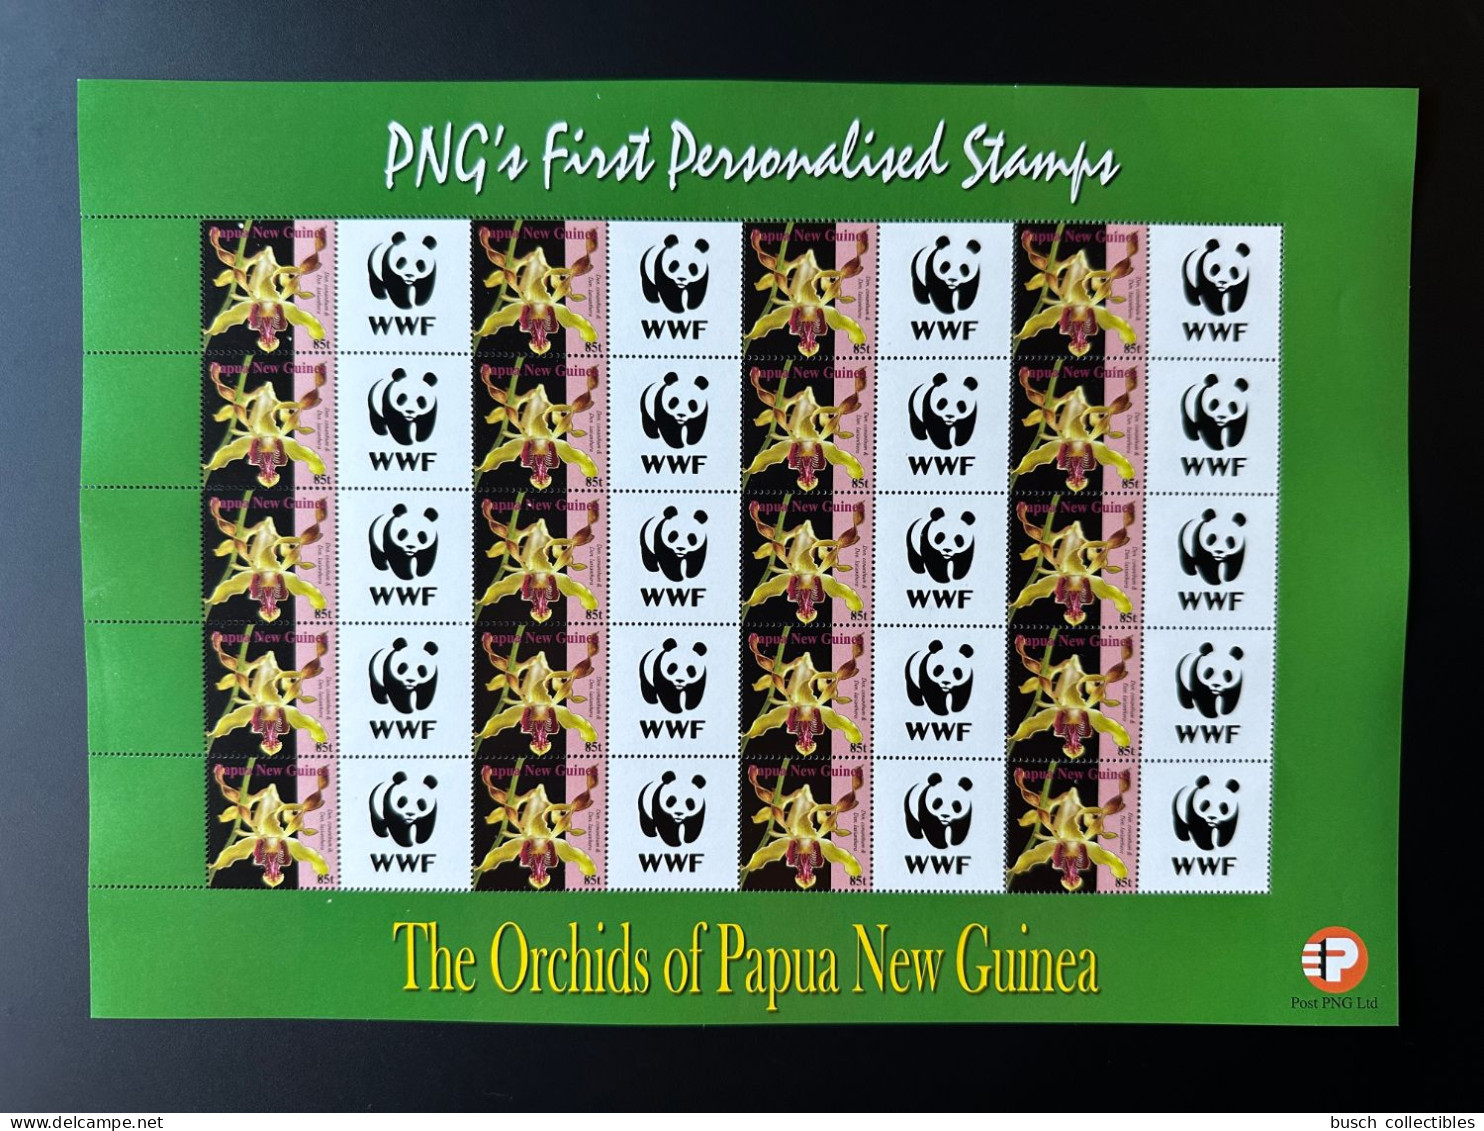 Papua New Guinea PNG 2007 Mi. 1244 Personalized WWF World Wide Fund For Nature Panda Faune Fauna Orchids Flowers - Orchideen